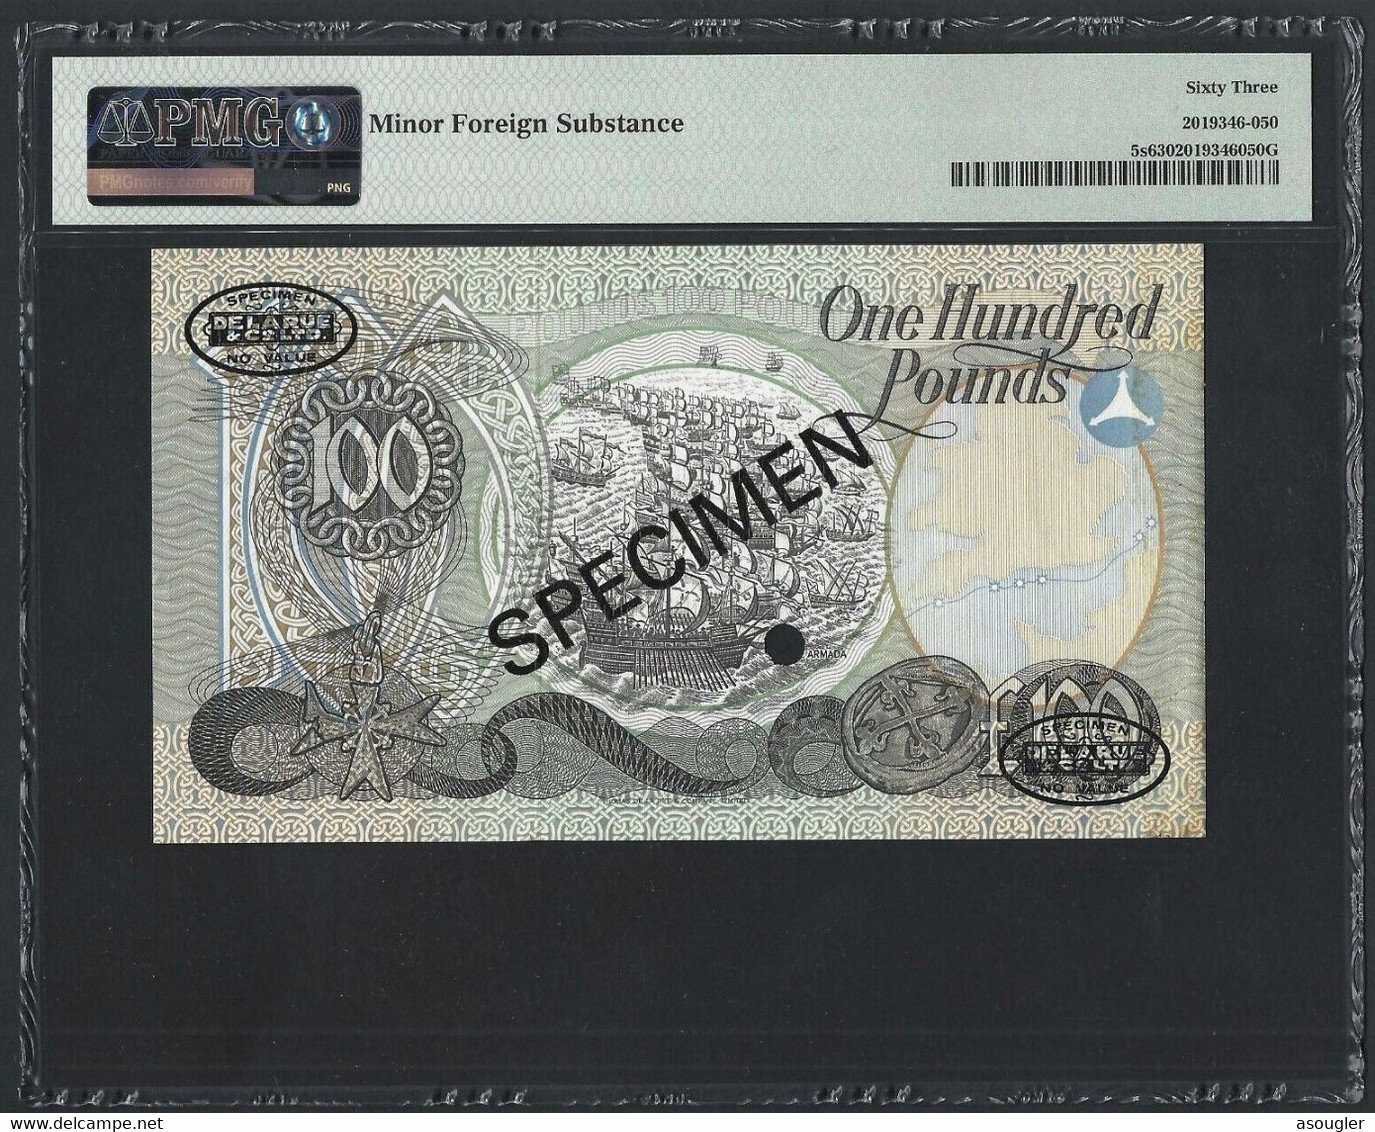 Ireland Northern 100 Pounds 1982 SPECIMEN PMG 63 UNC P-5s "free Shipping Via Registered Air Mail" - 100 Pounds